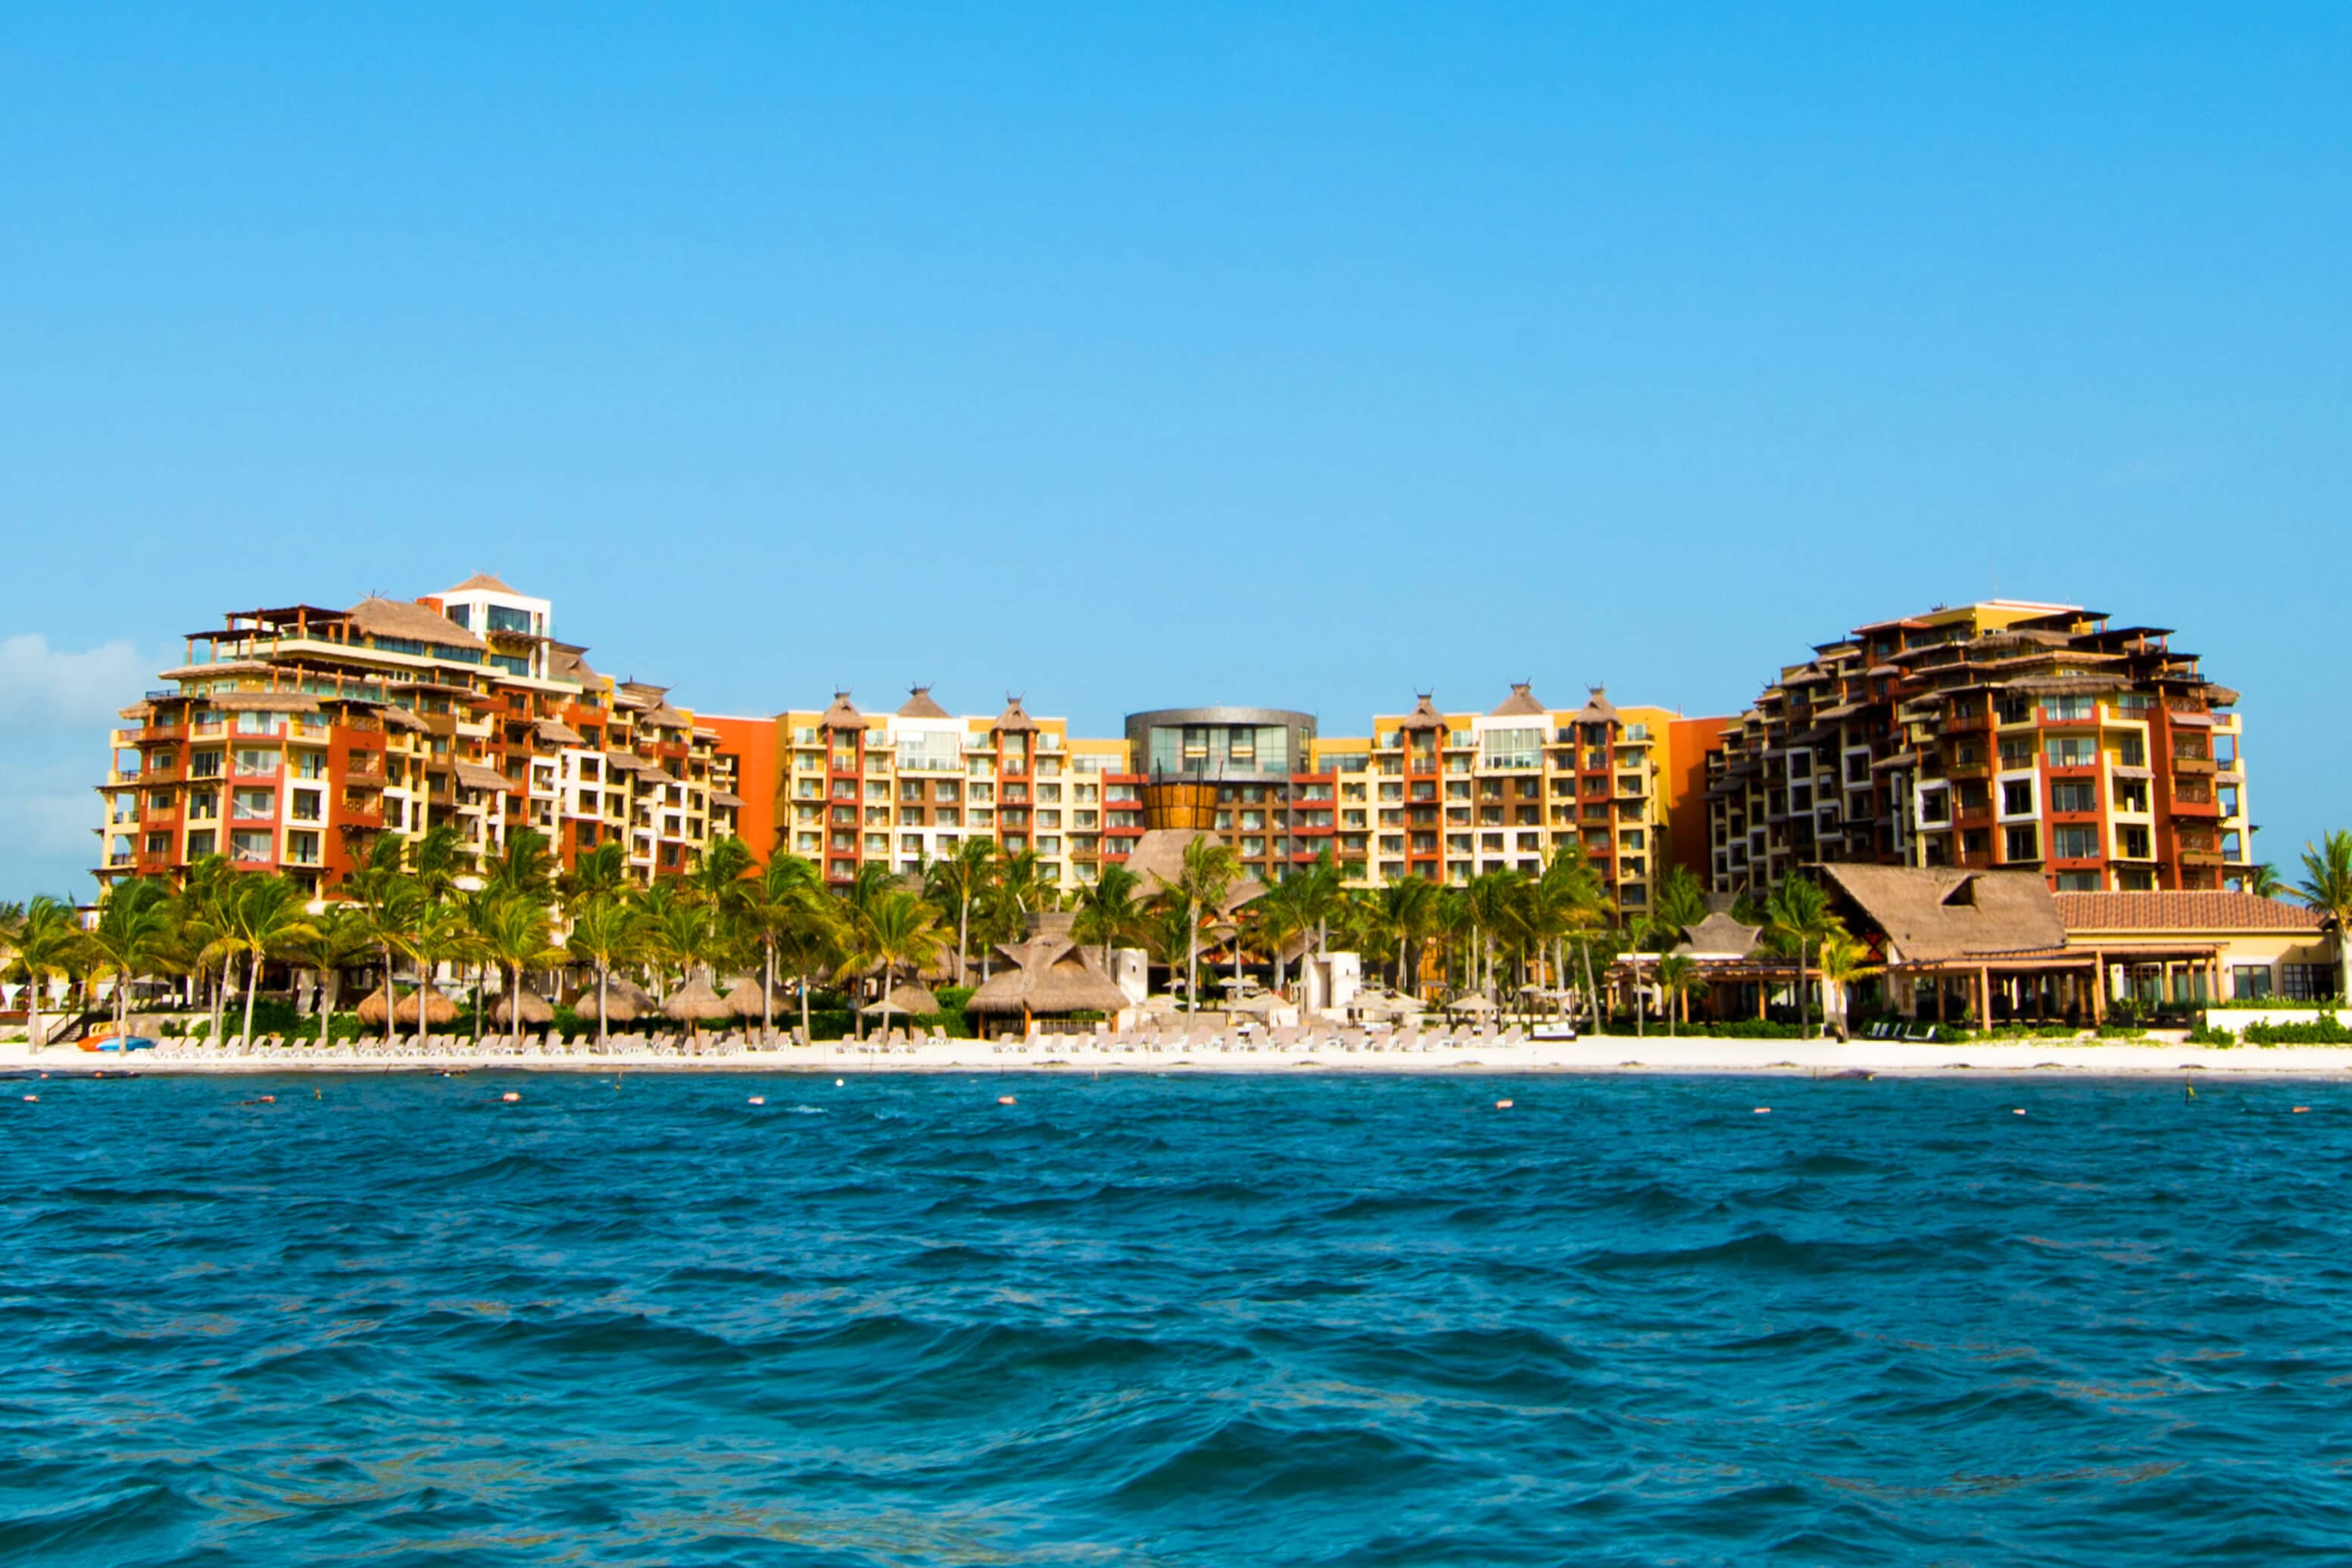 Villa del Palmar Cancun Timeshare for the Coming Year